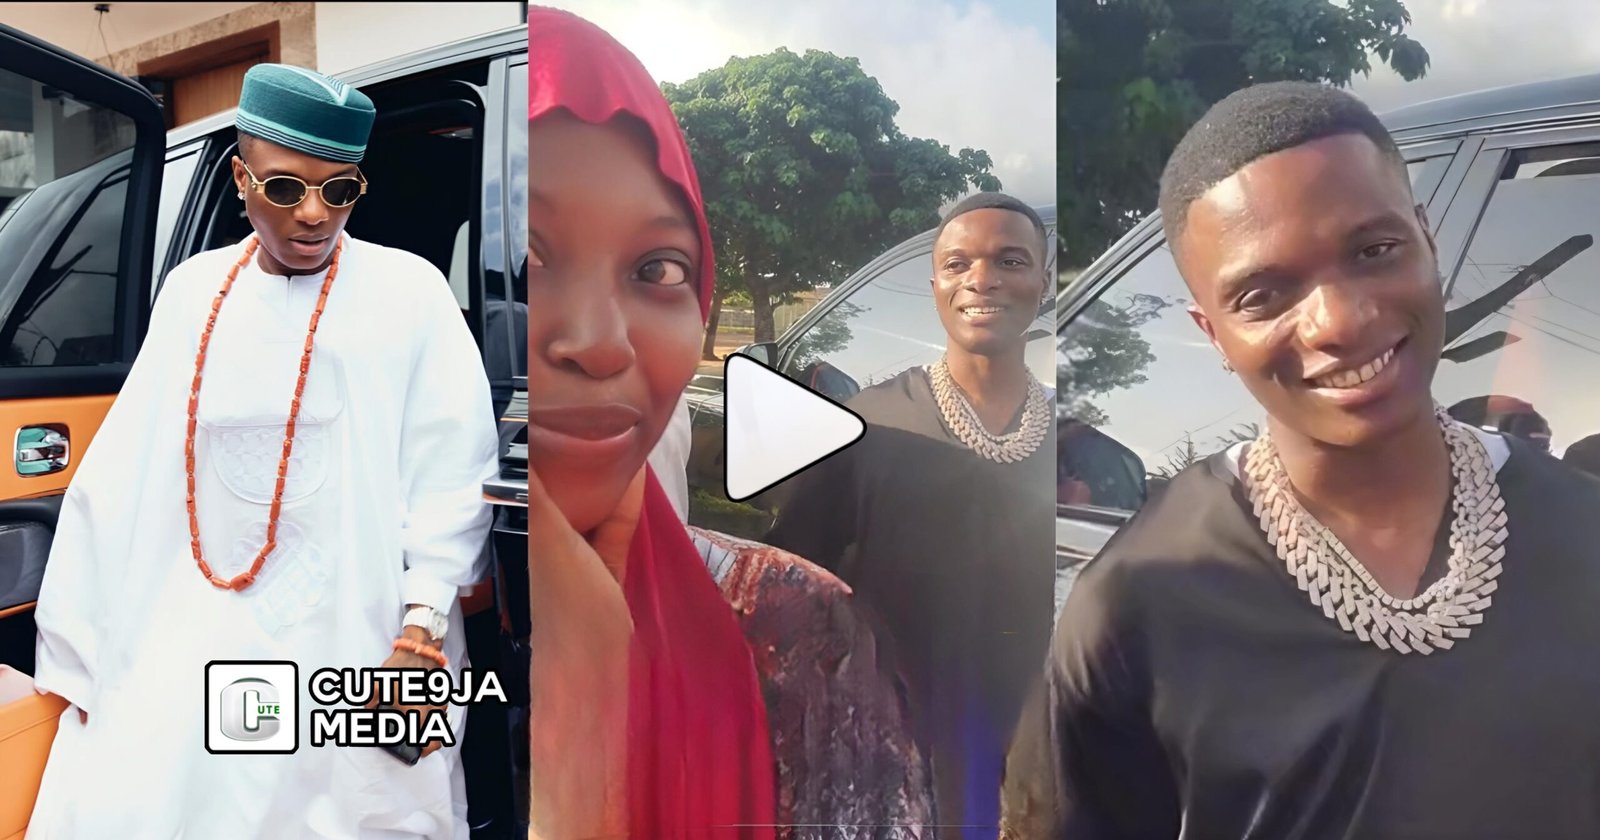 “Now I see wettin una dey use millions of ₦ see” – Lady OverJoy after meeting Wizkid in Ijebu Ode (Watch)